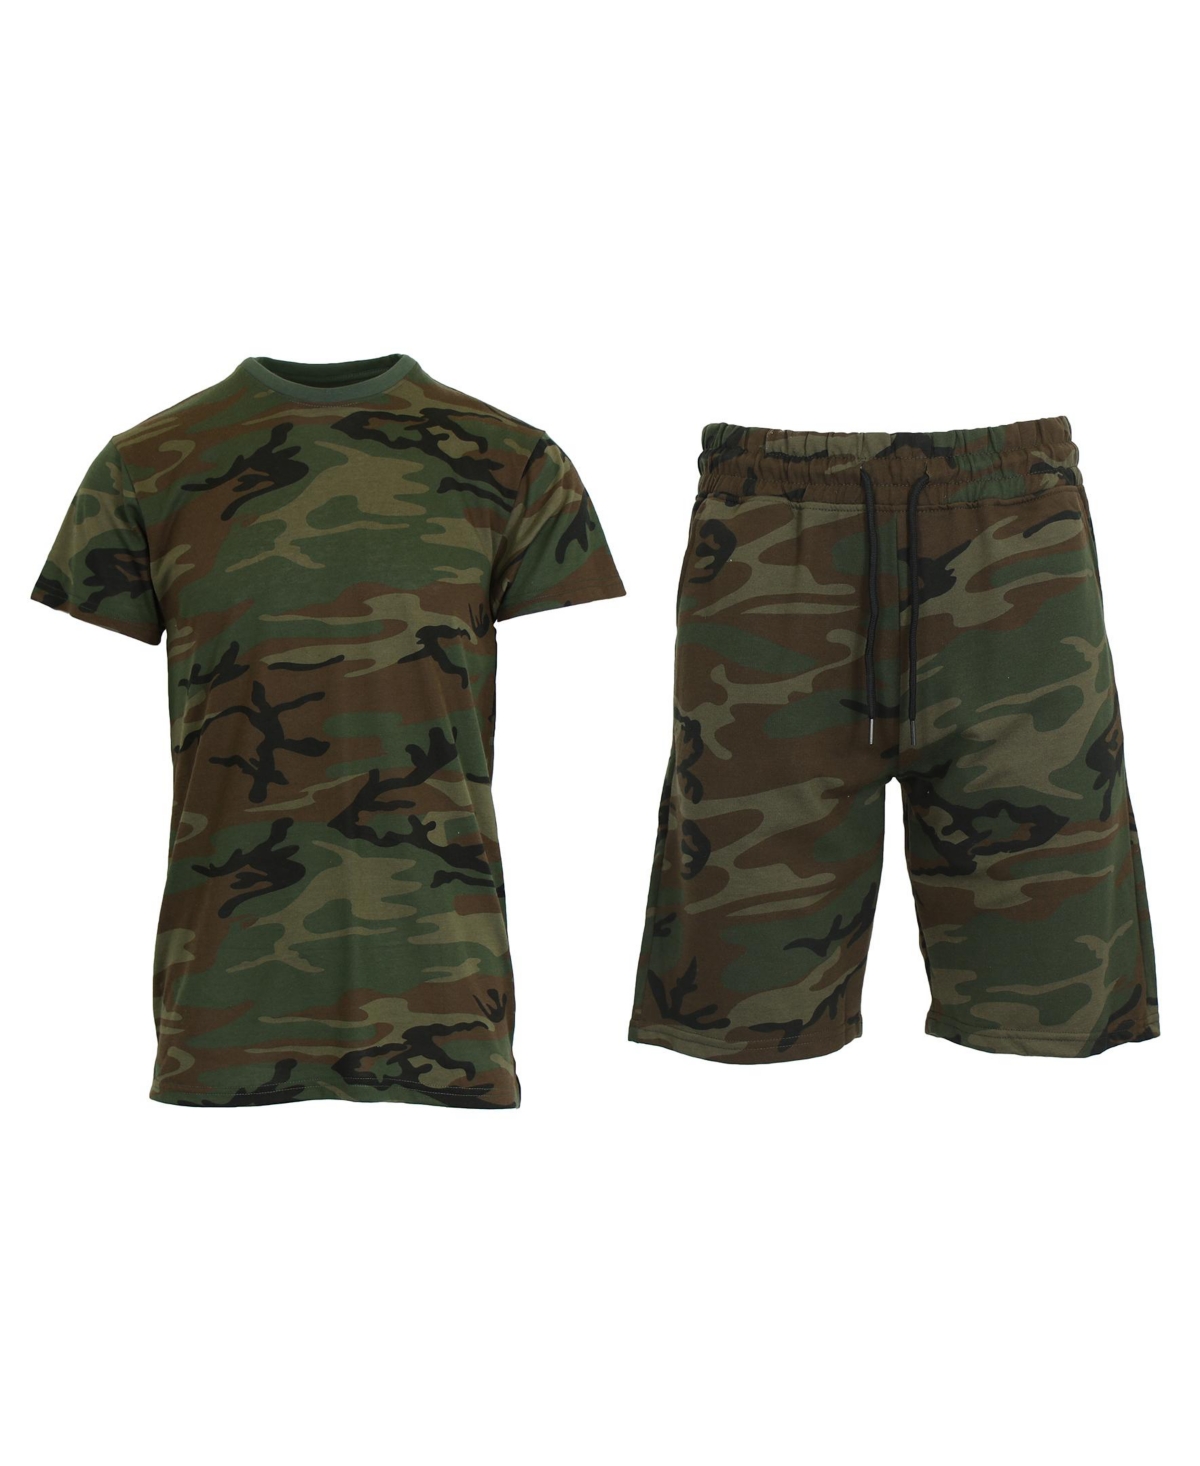 Galaxy By Harvic Men's Camo Short Sleeve T-shirt And Shorts, 2-piece Set In Woodland Camo